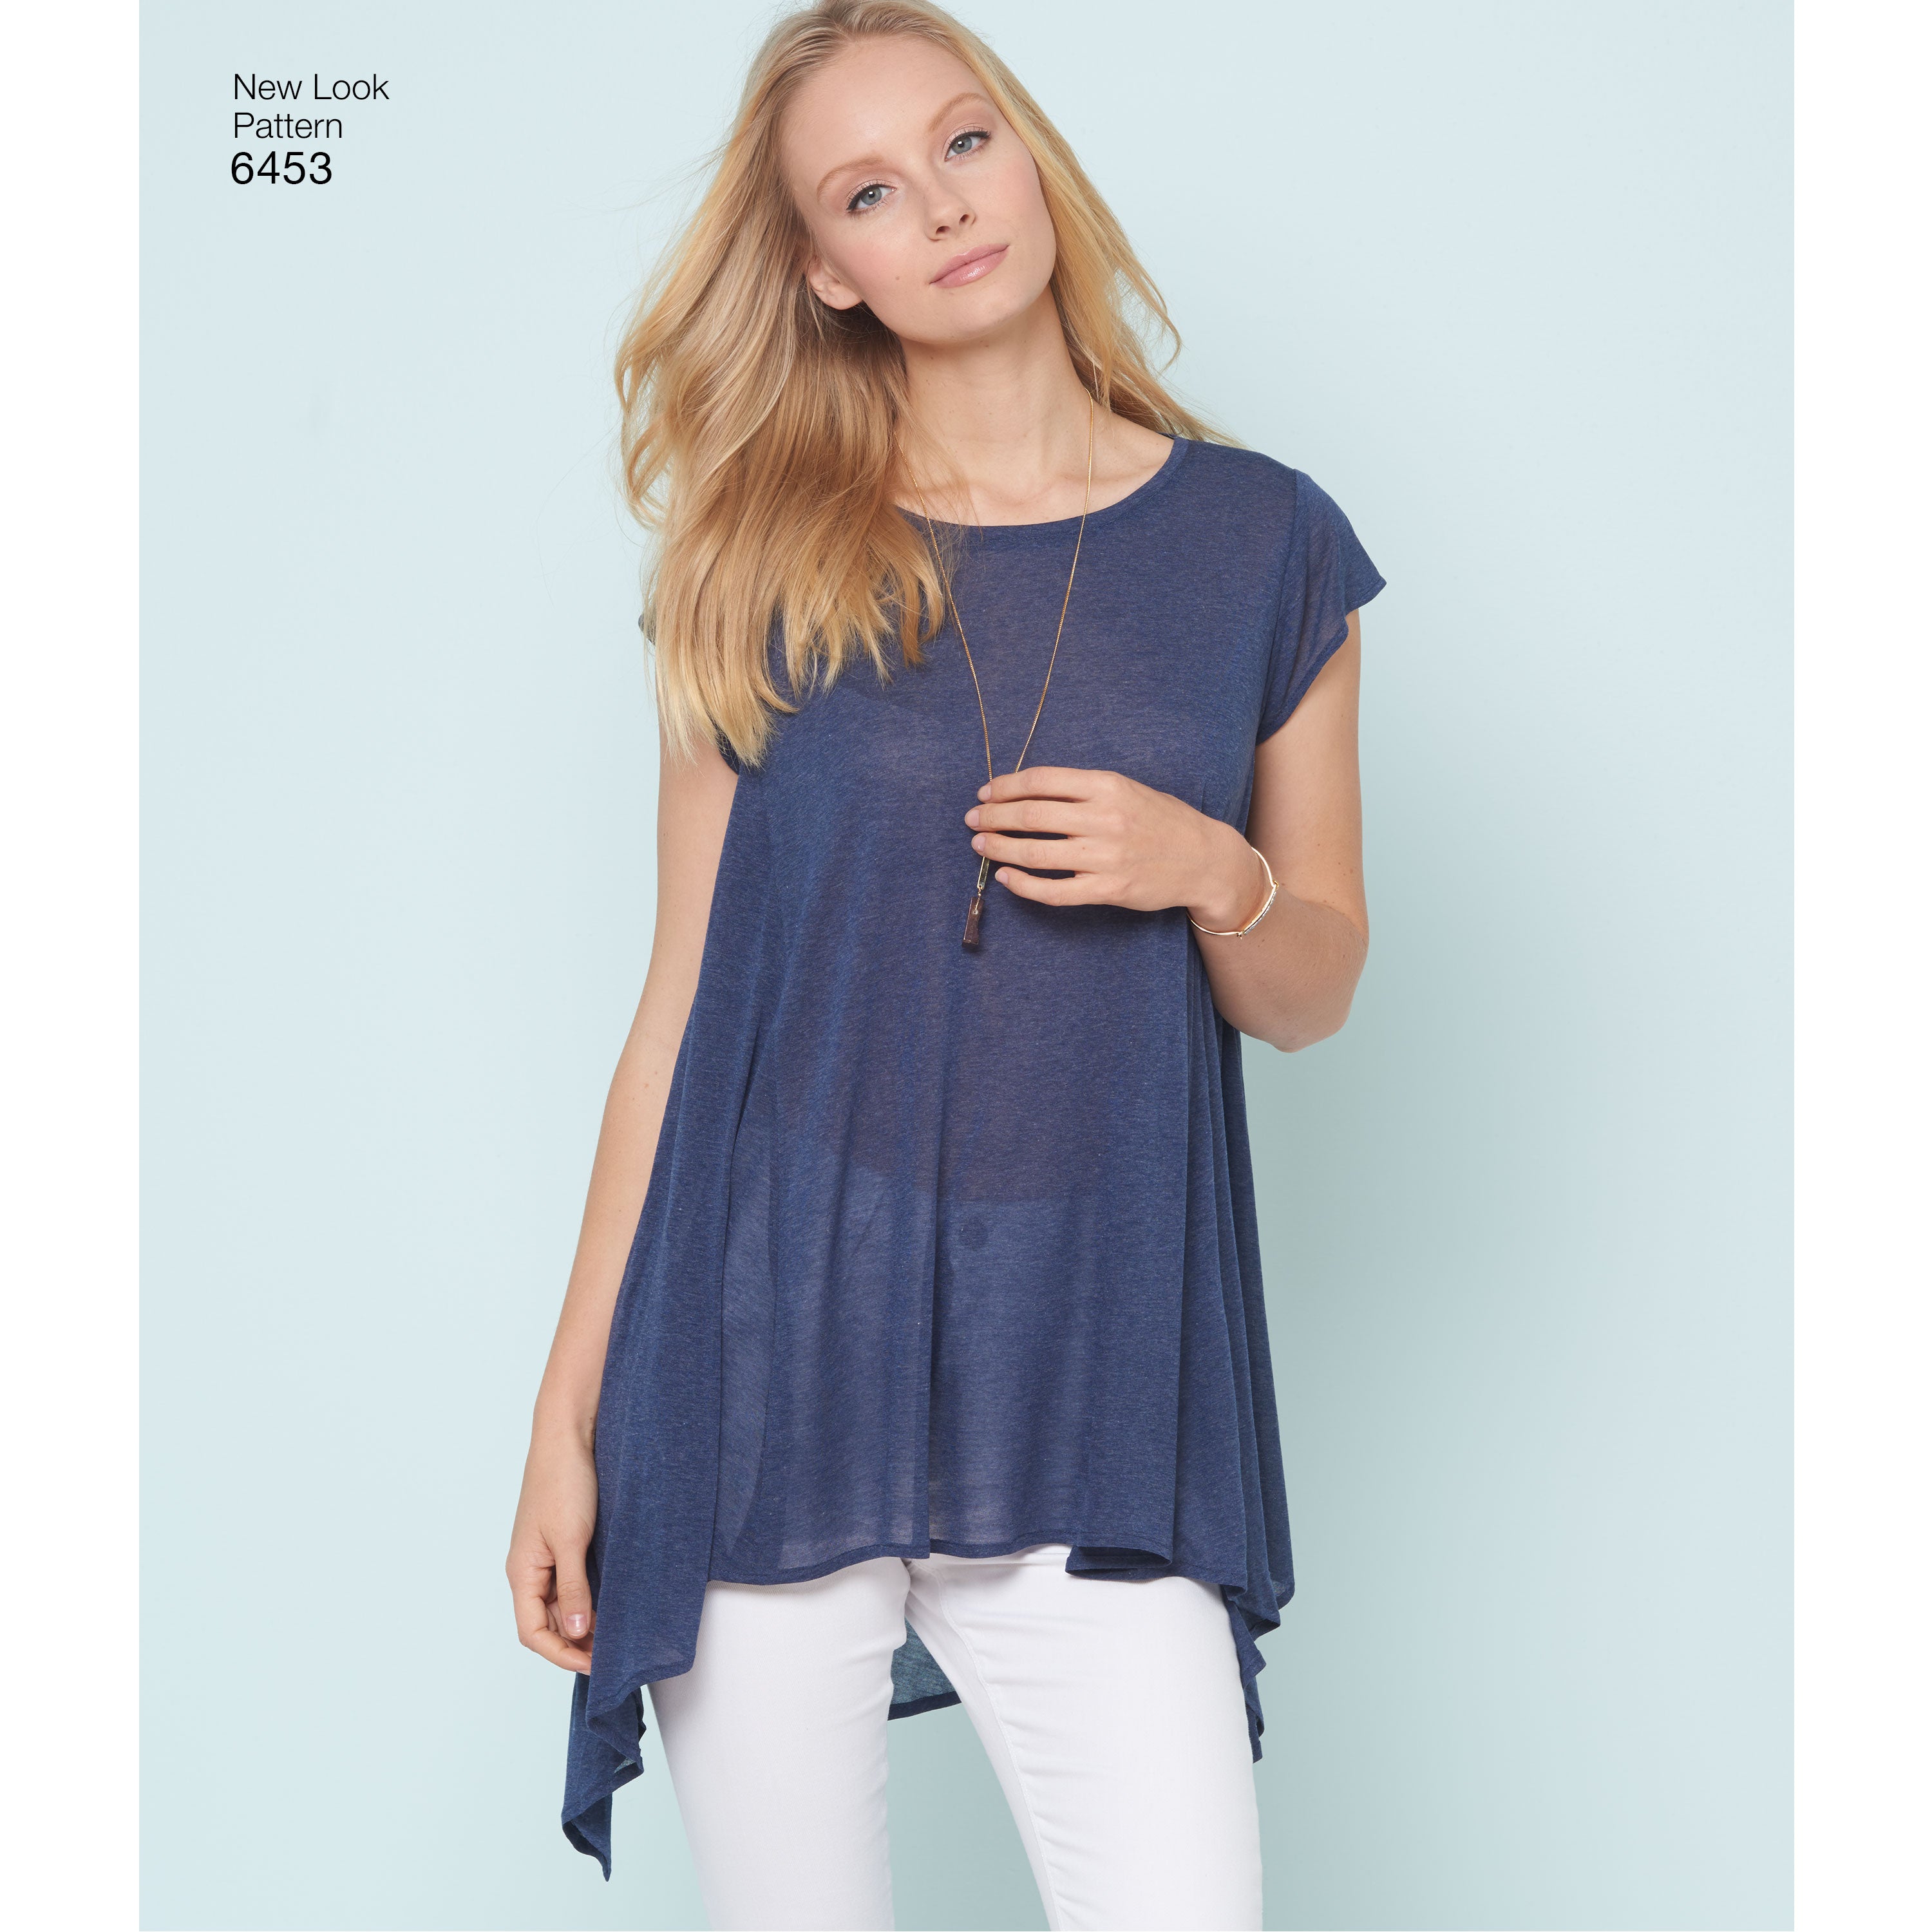 New Look Sewing Pattern 6453 - Misses' Easy Knit Tops – My Sewing Box